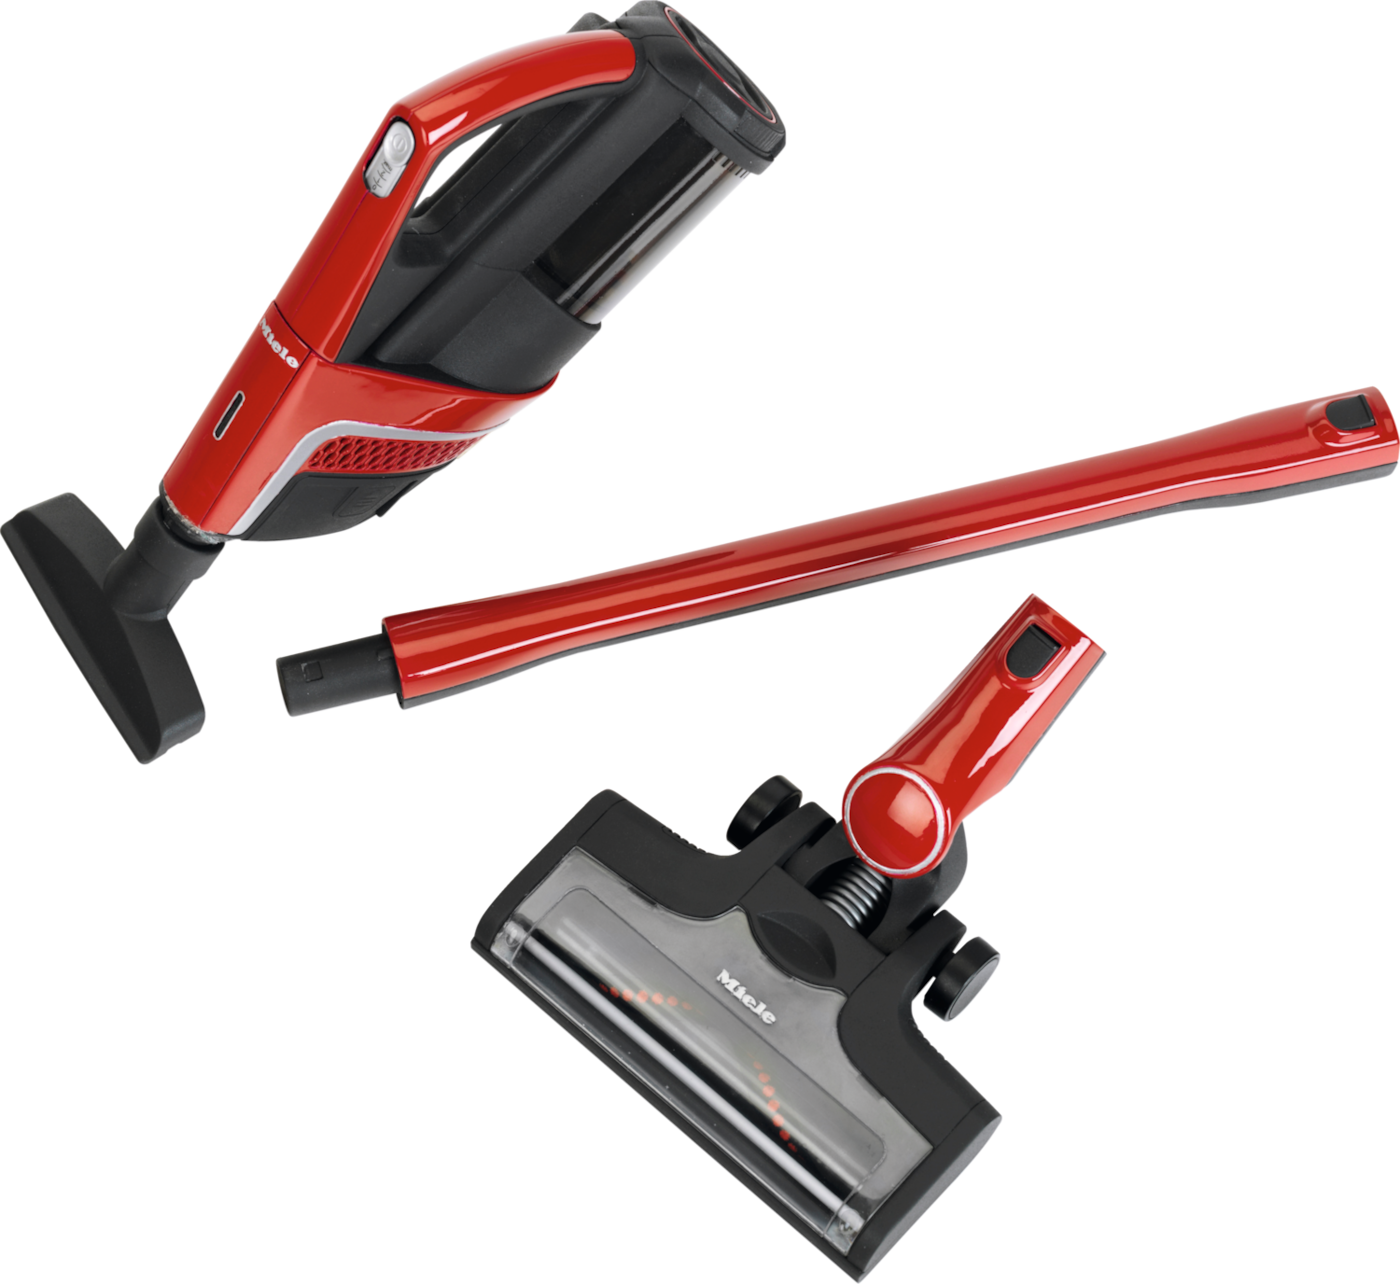 Miele toy vacuum cleaner "Triflex" red product photo Laydowns Detail View ZOOM